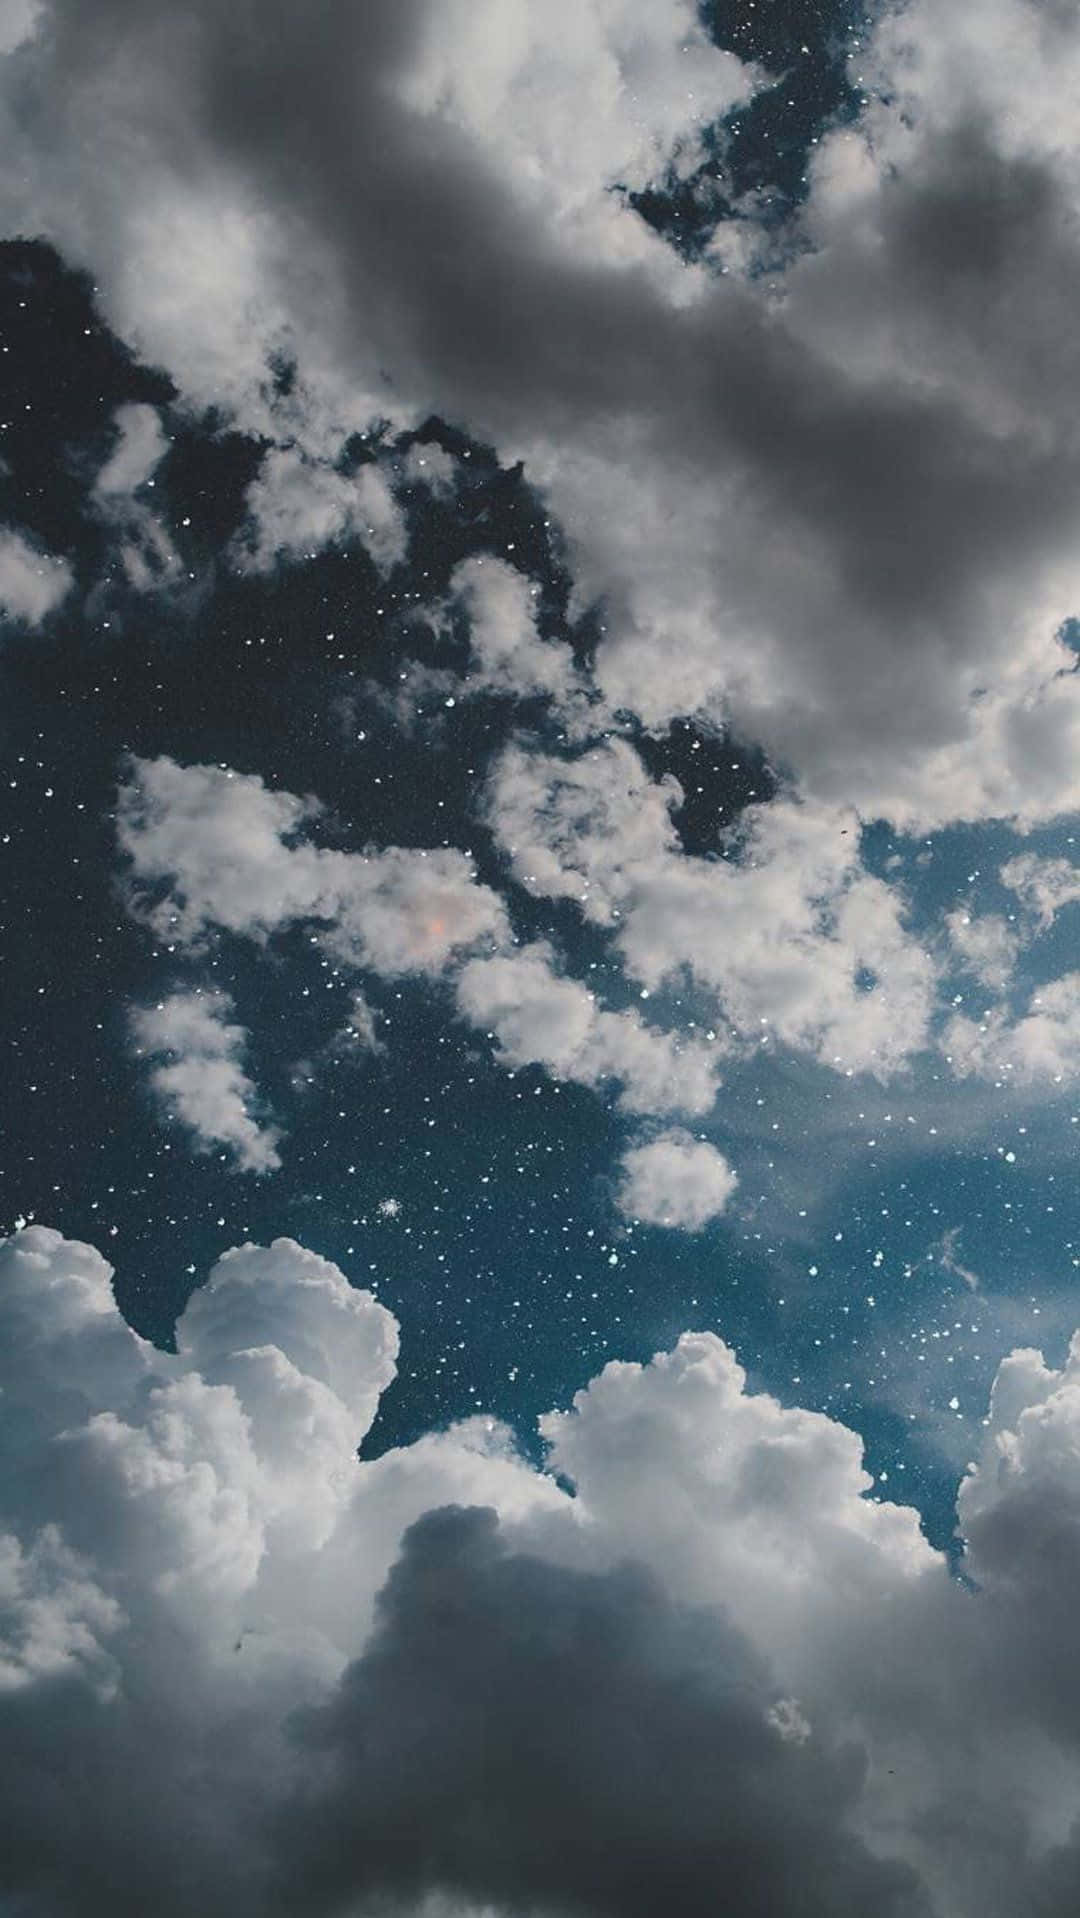 A Cloudy Sky With Stars